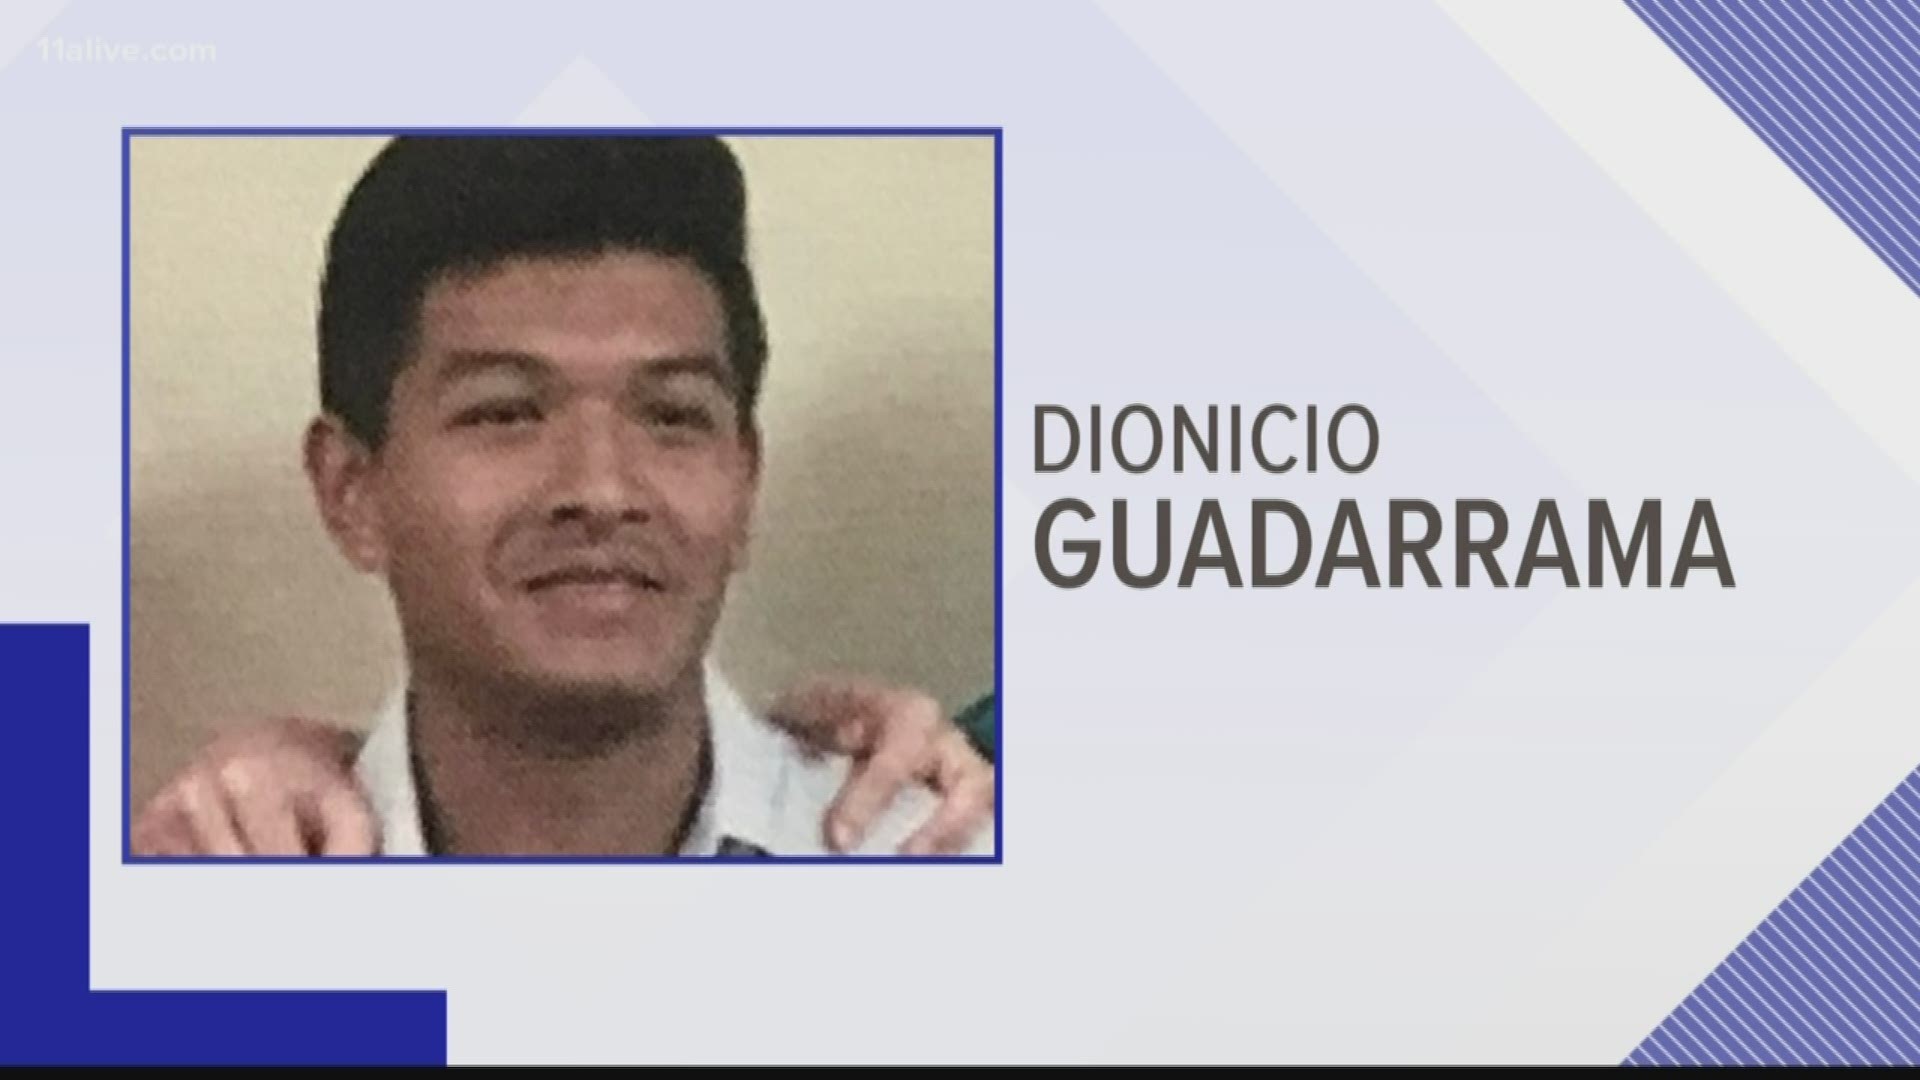 Dionicio Guadarrama wanted for rape, sexual battery charges | 11alive.com